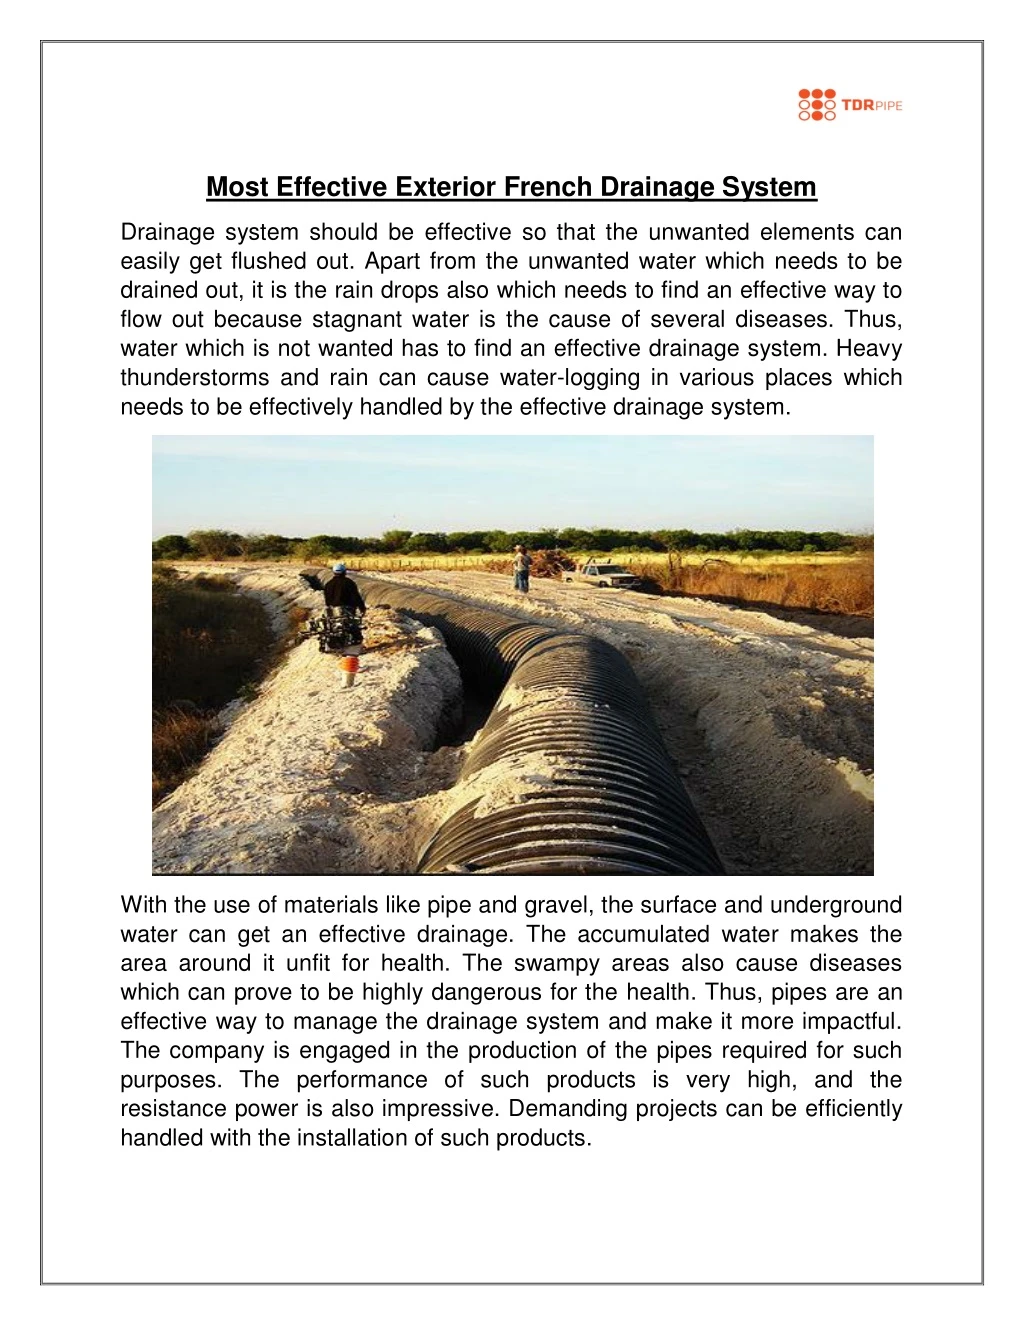 most effective exterior french drainage system